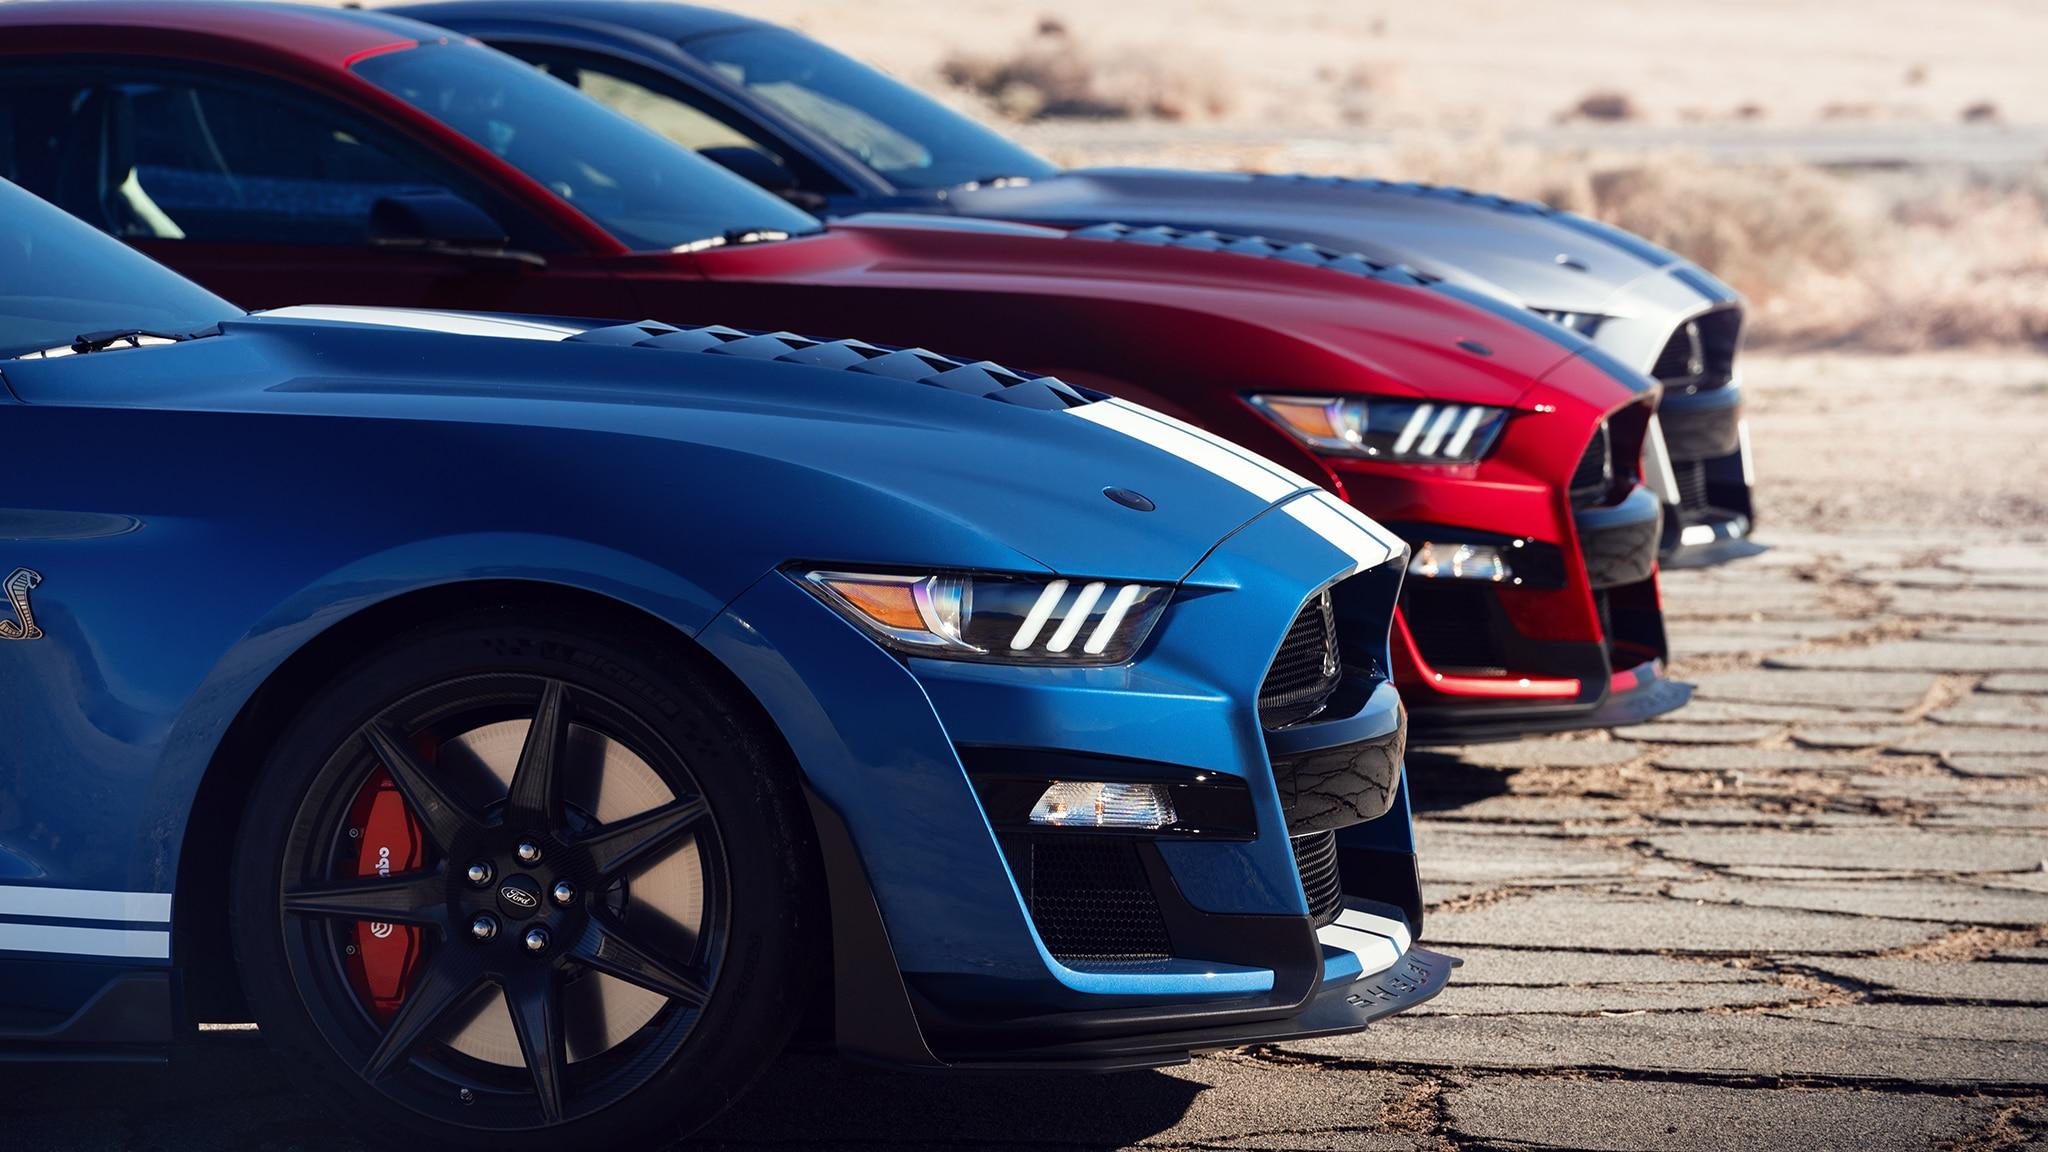 Ford Mustang Shelby GT350 vs. GT500: Which Is